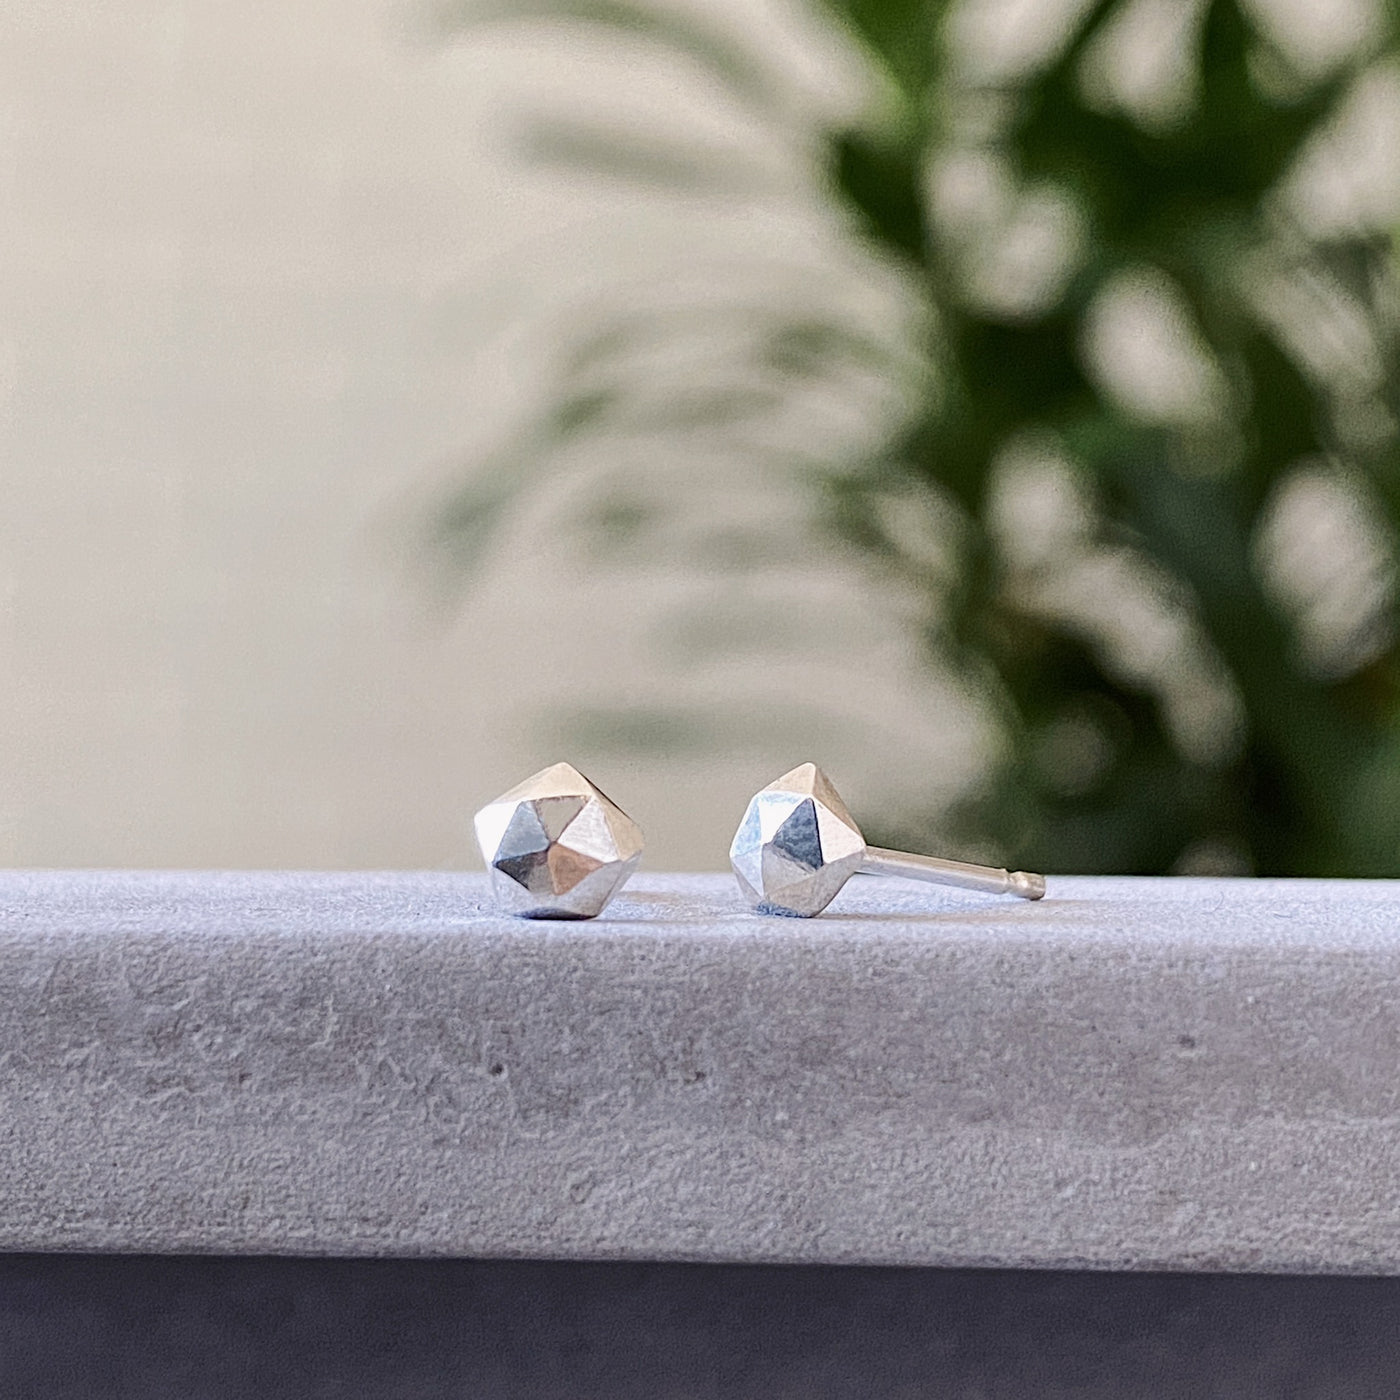 sterling silver micro size geometric faceted stud earrings by Corey Egan side view on concrete